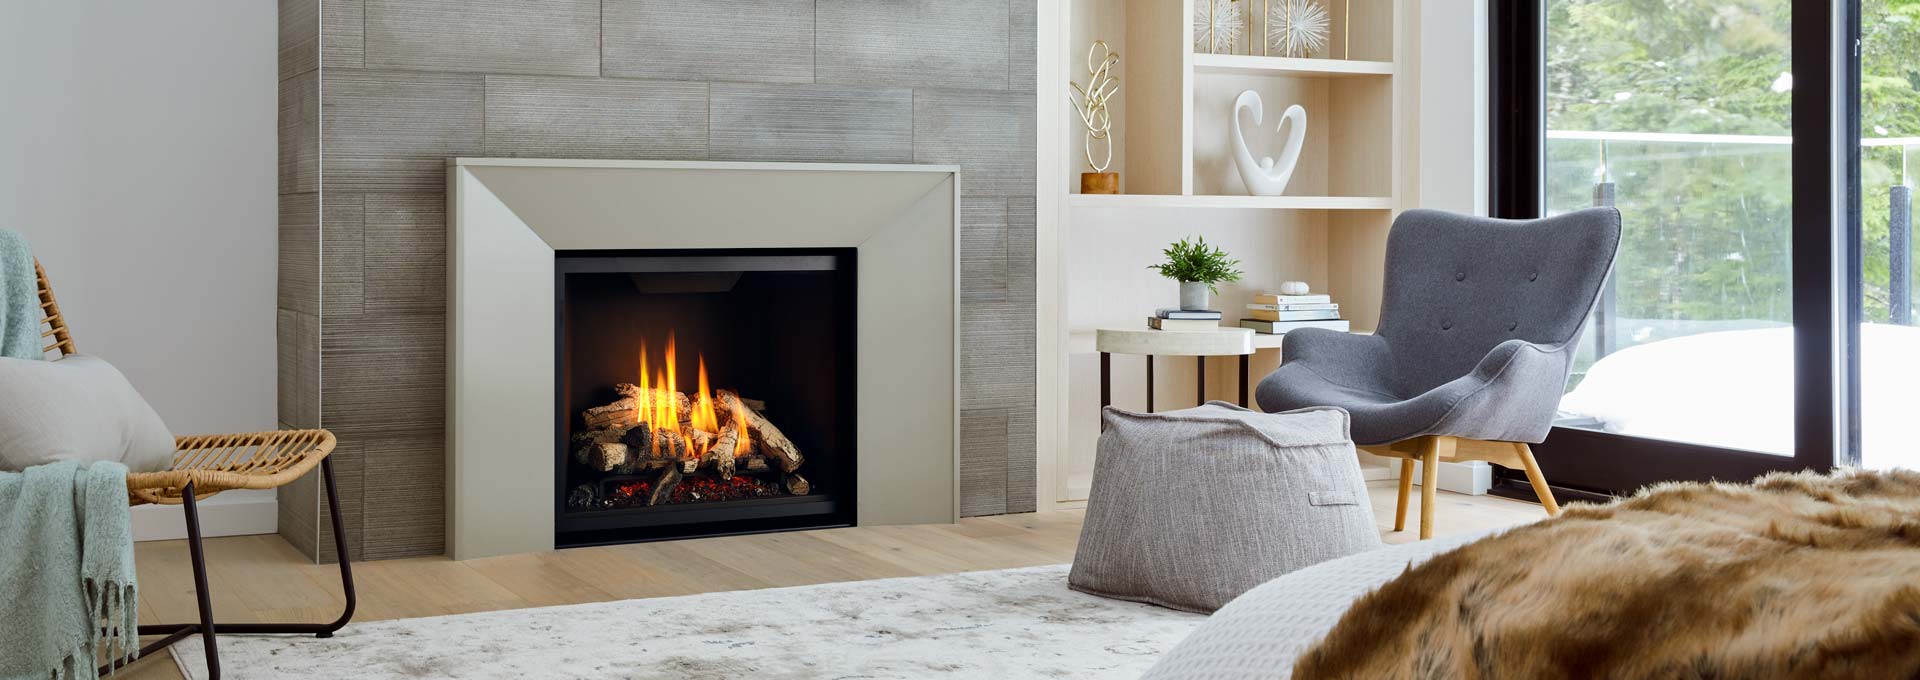 Regency Regency Grandview G800EH Gas Fireplace G800EH-NG Fireplace Finished - Gas